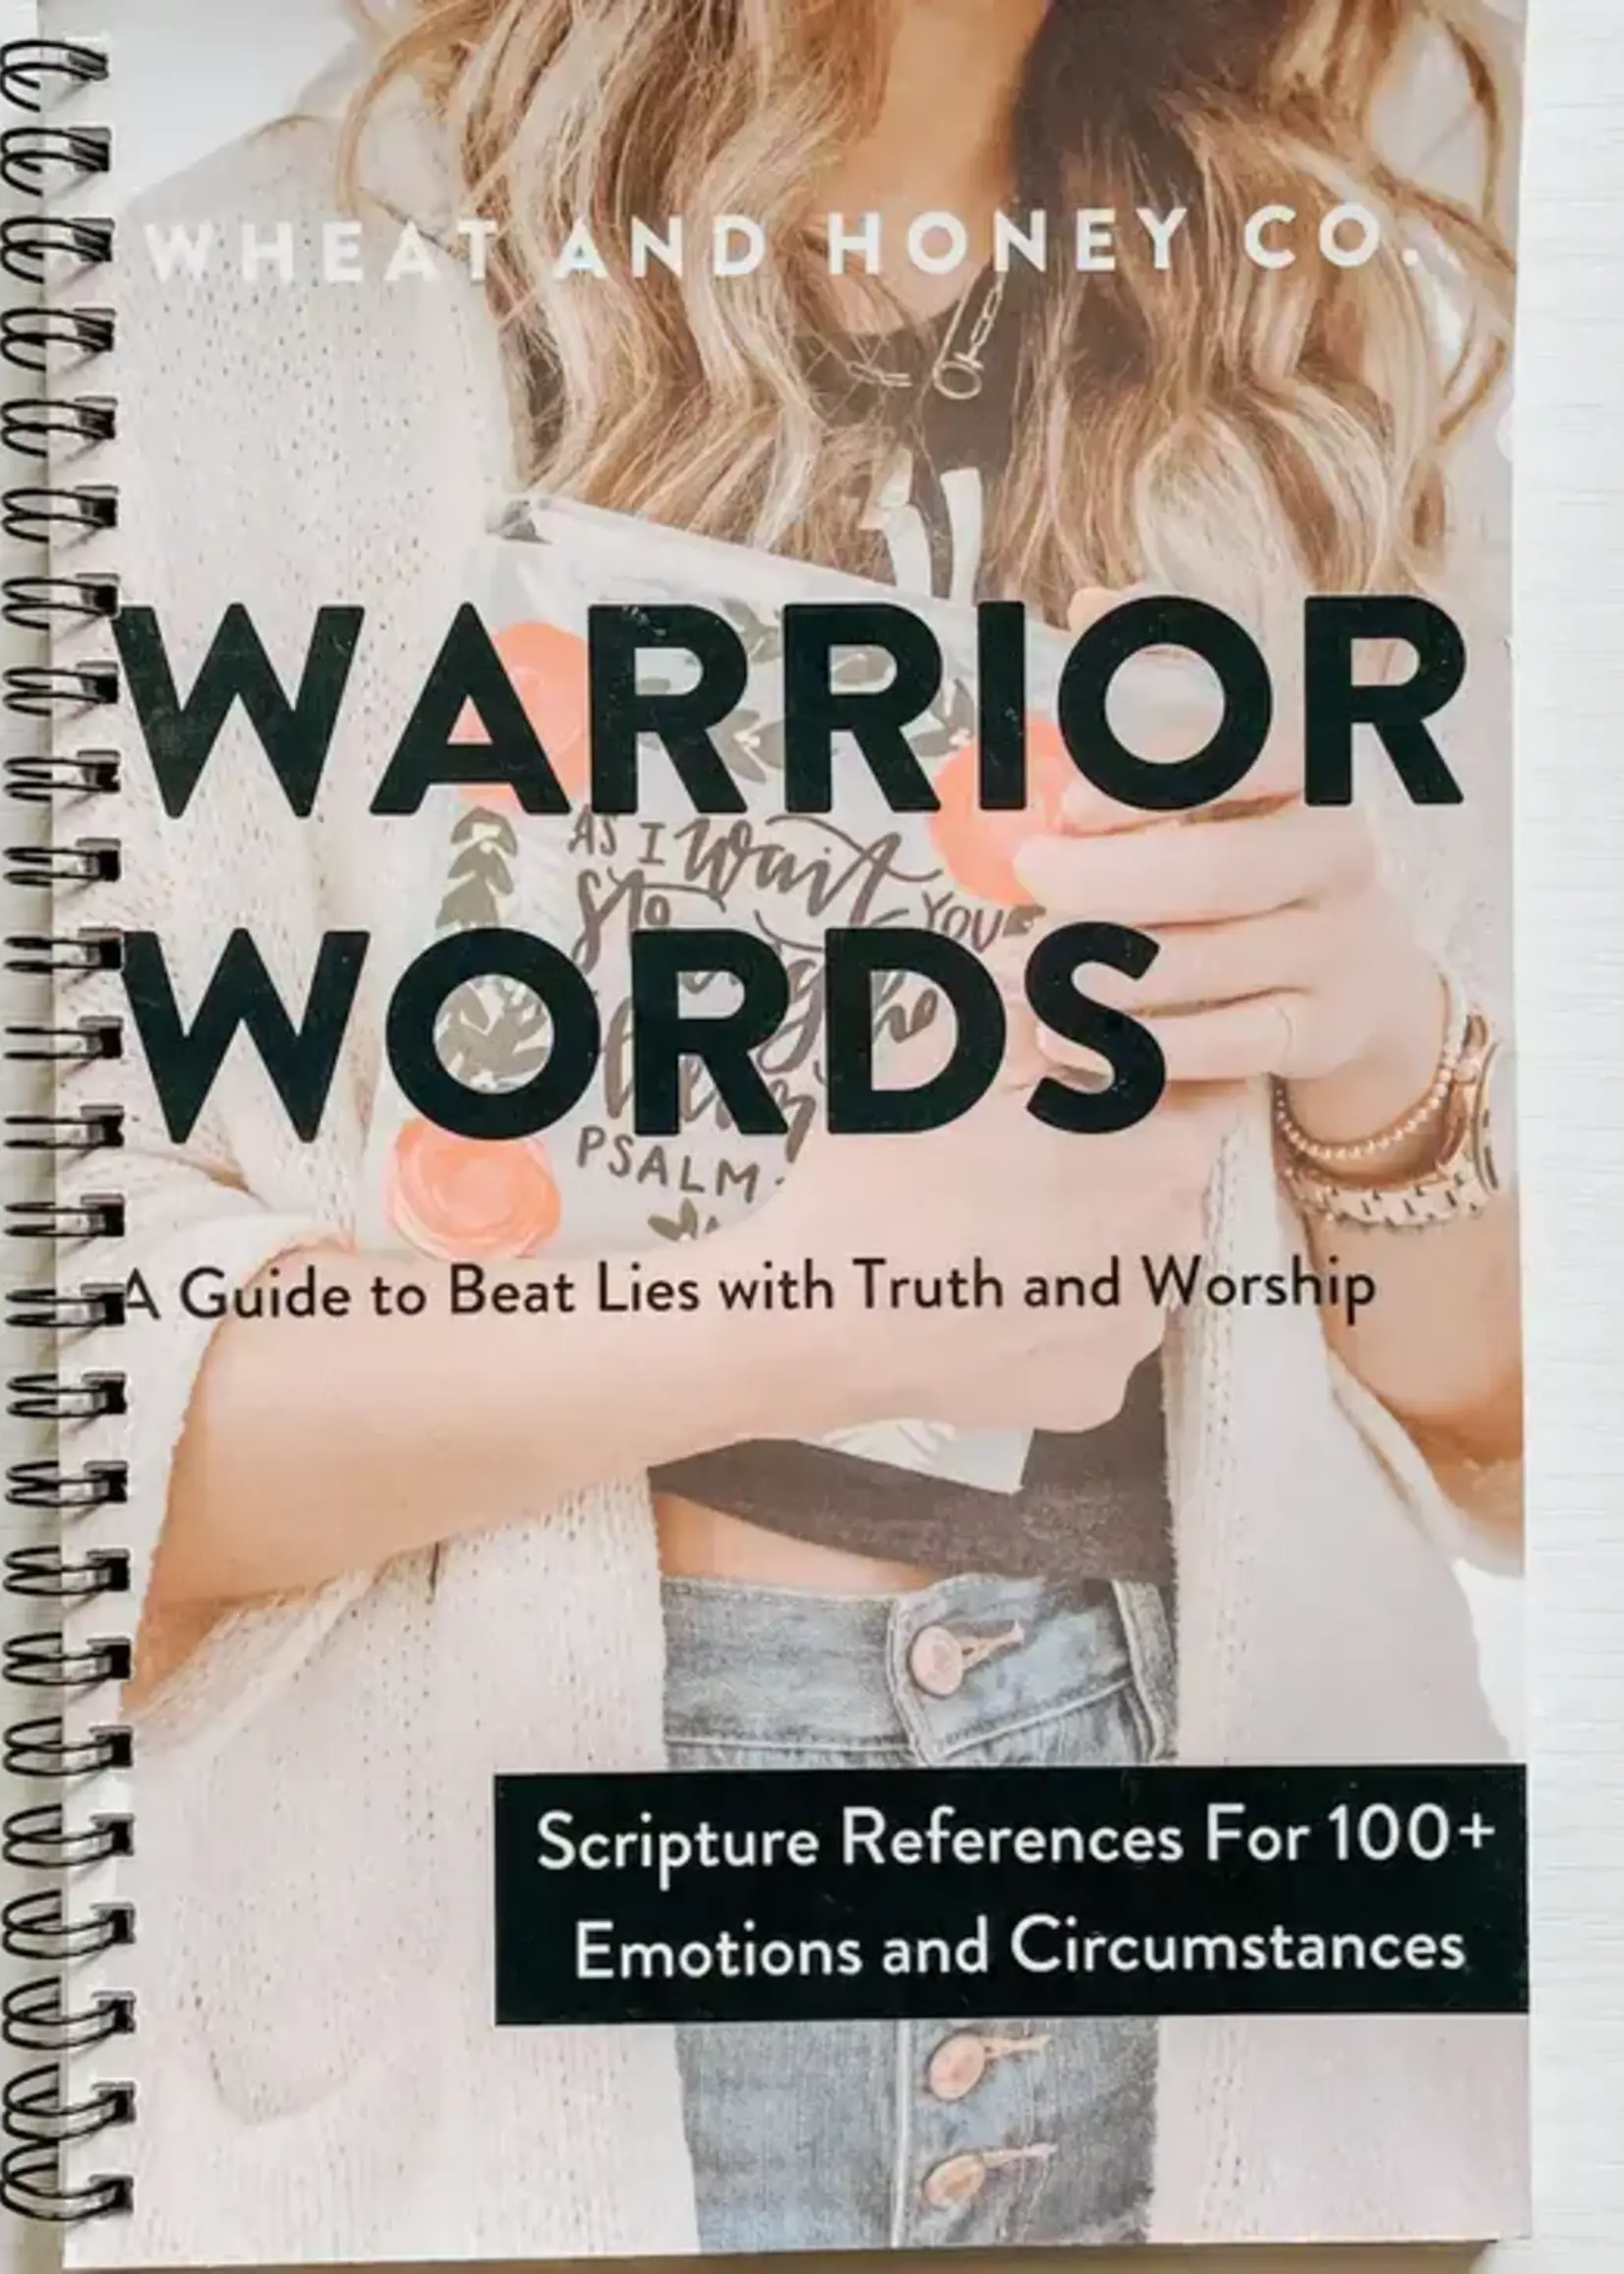 WHEAT & HONEY CO WARRIOR WORDS-Scripture reference tool